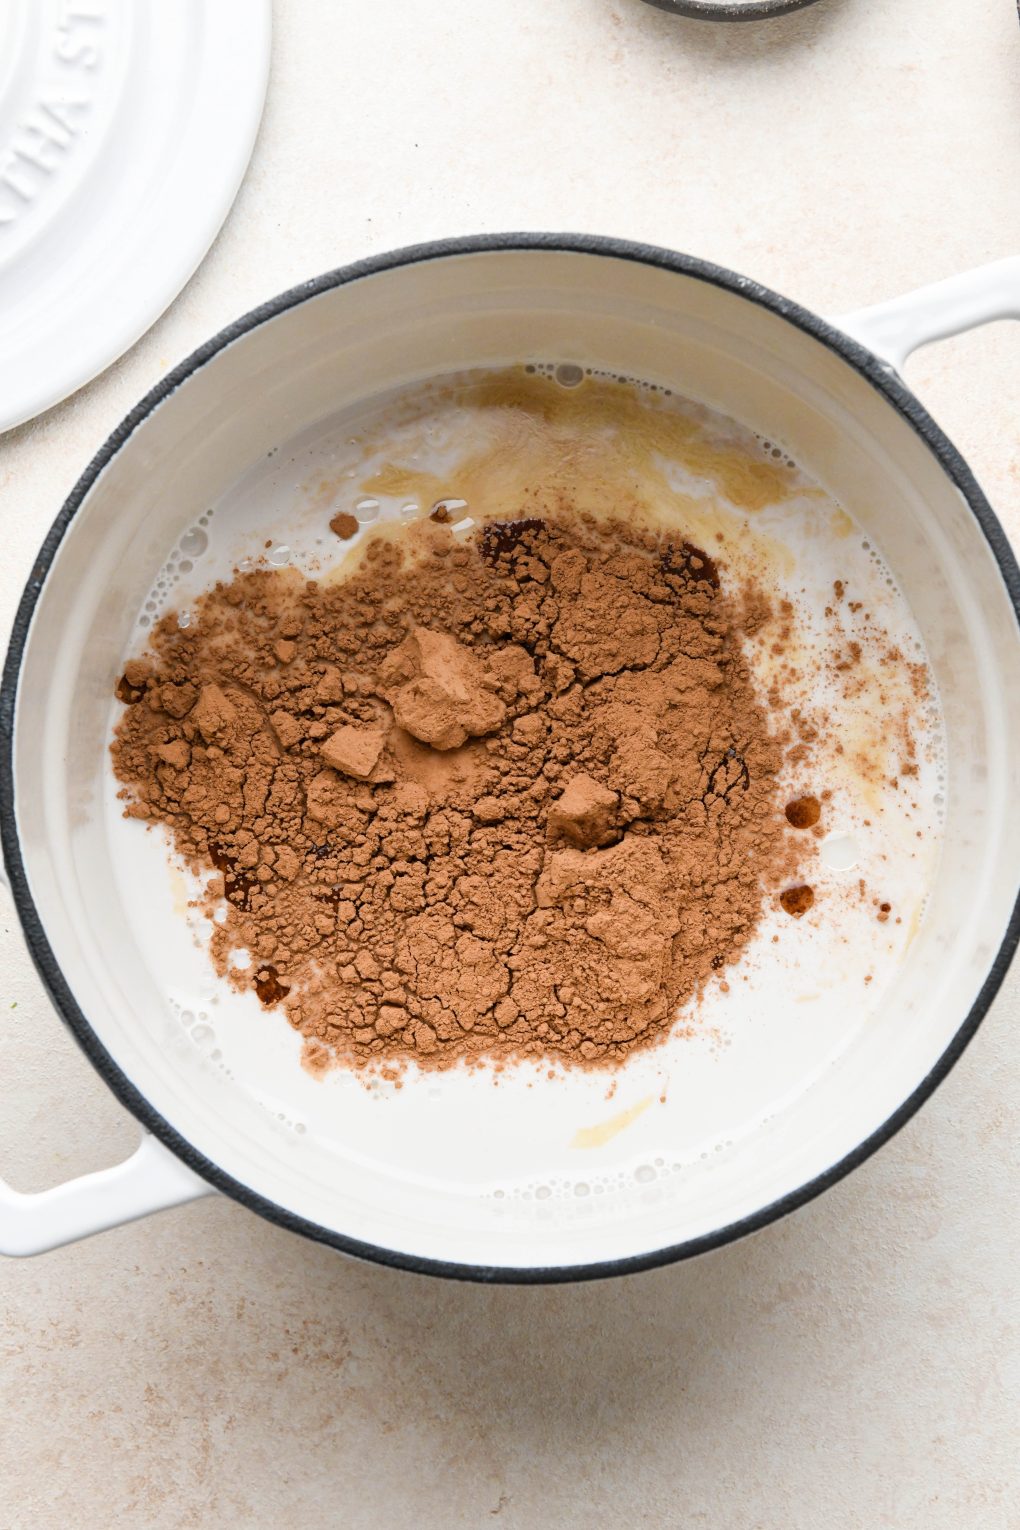 How to make peppermint hot chocolate. Milk, extracts, and cacao powder in small sauce pan.